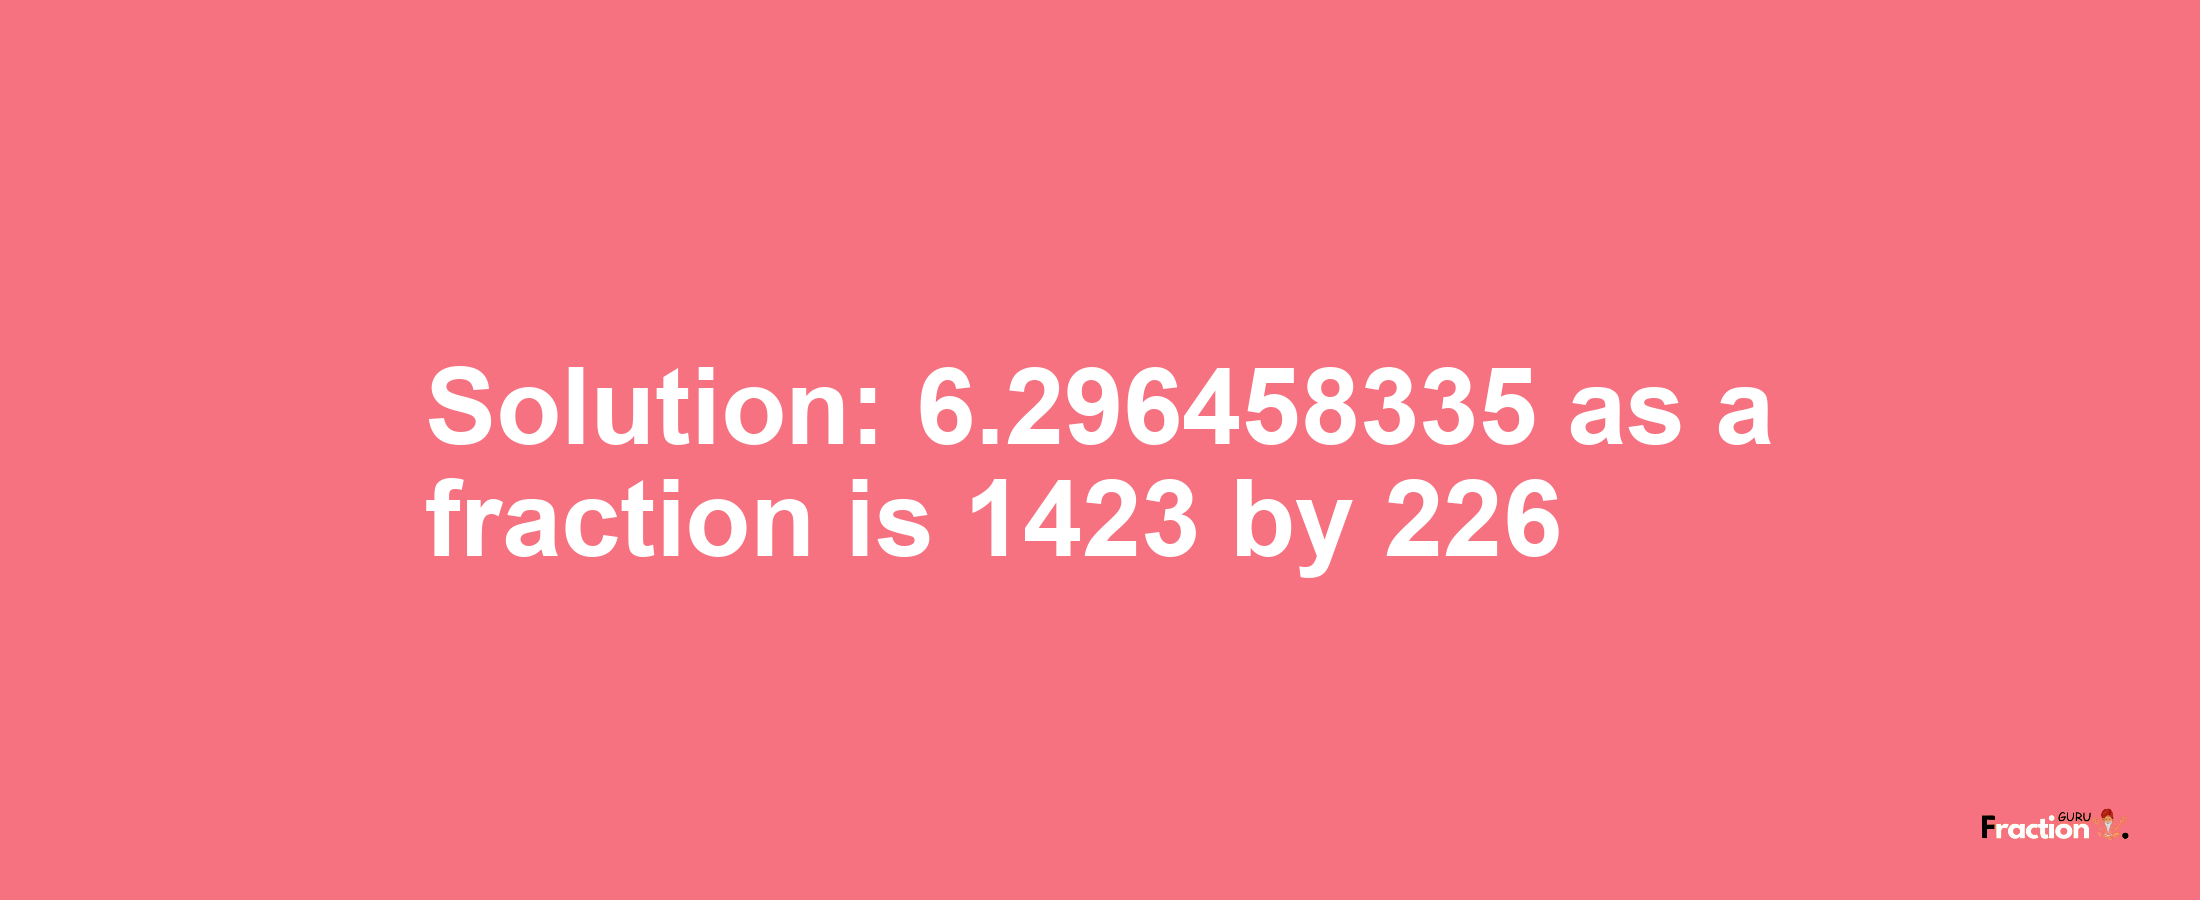 Solution:6.296458335 as a fraction is 1423/226